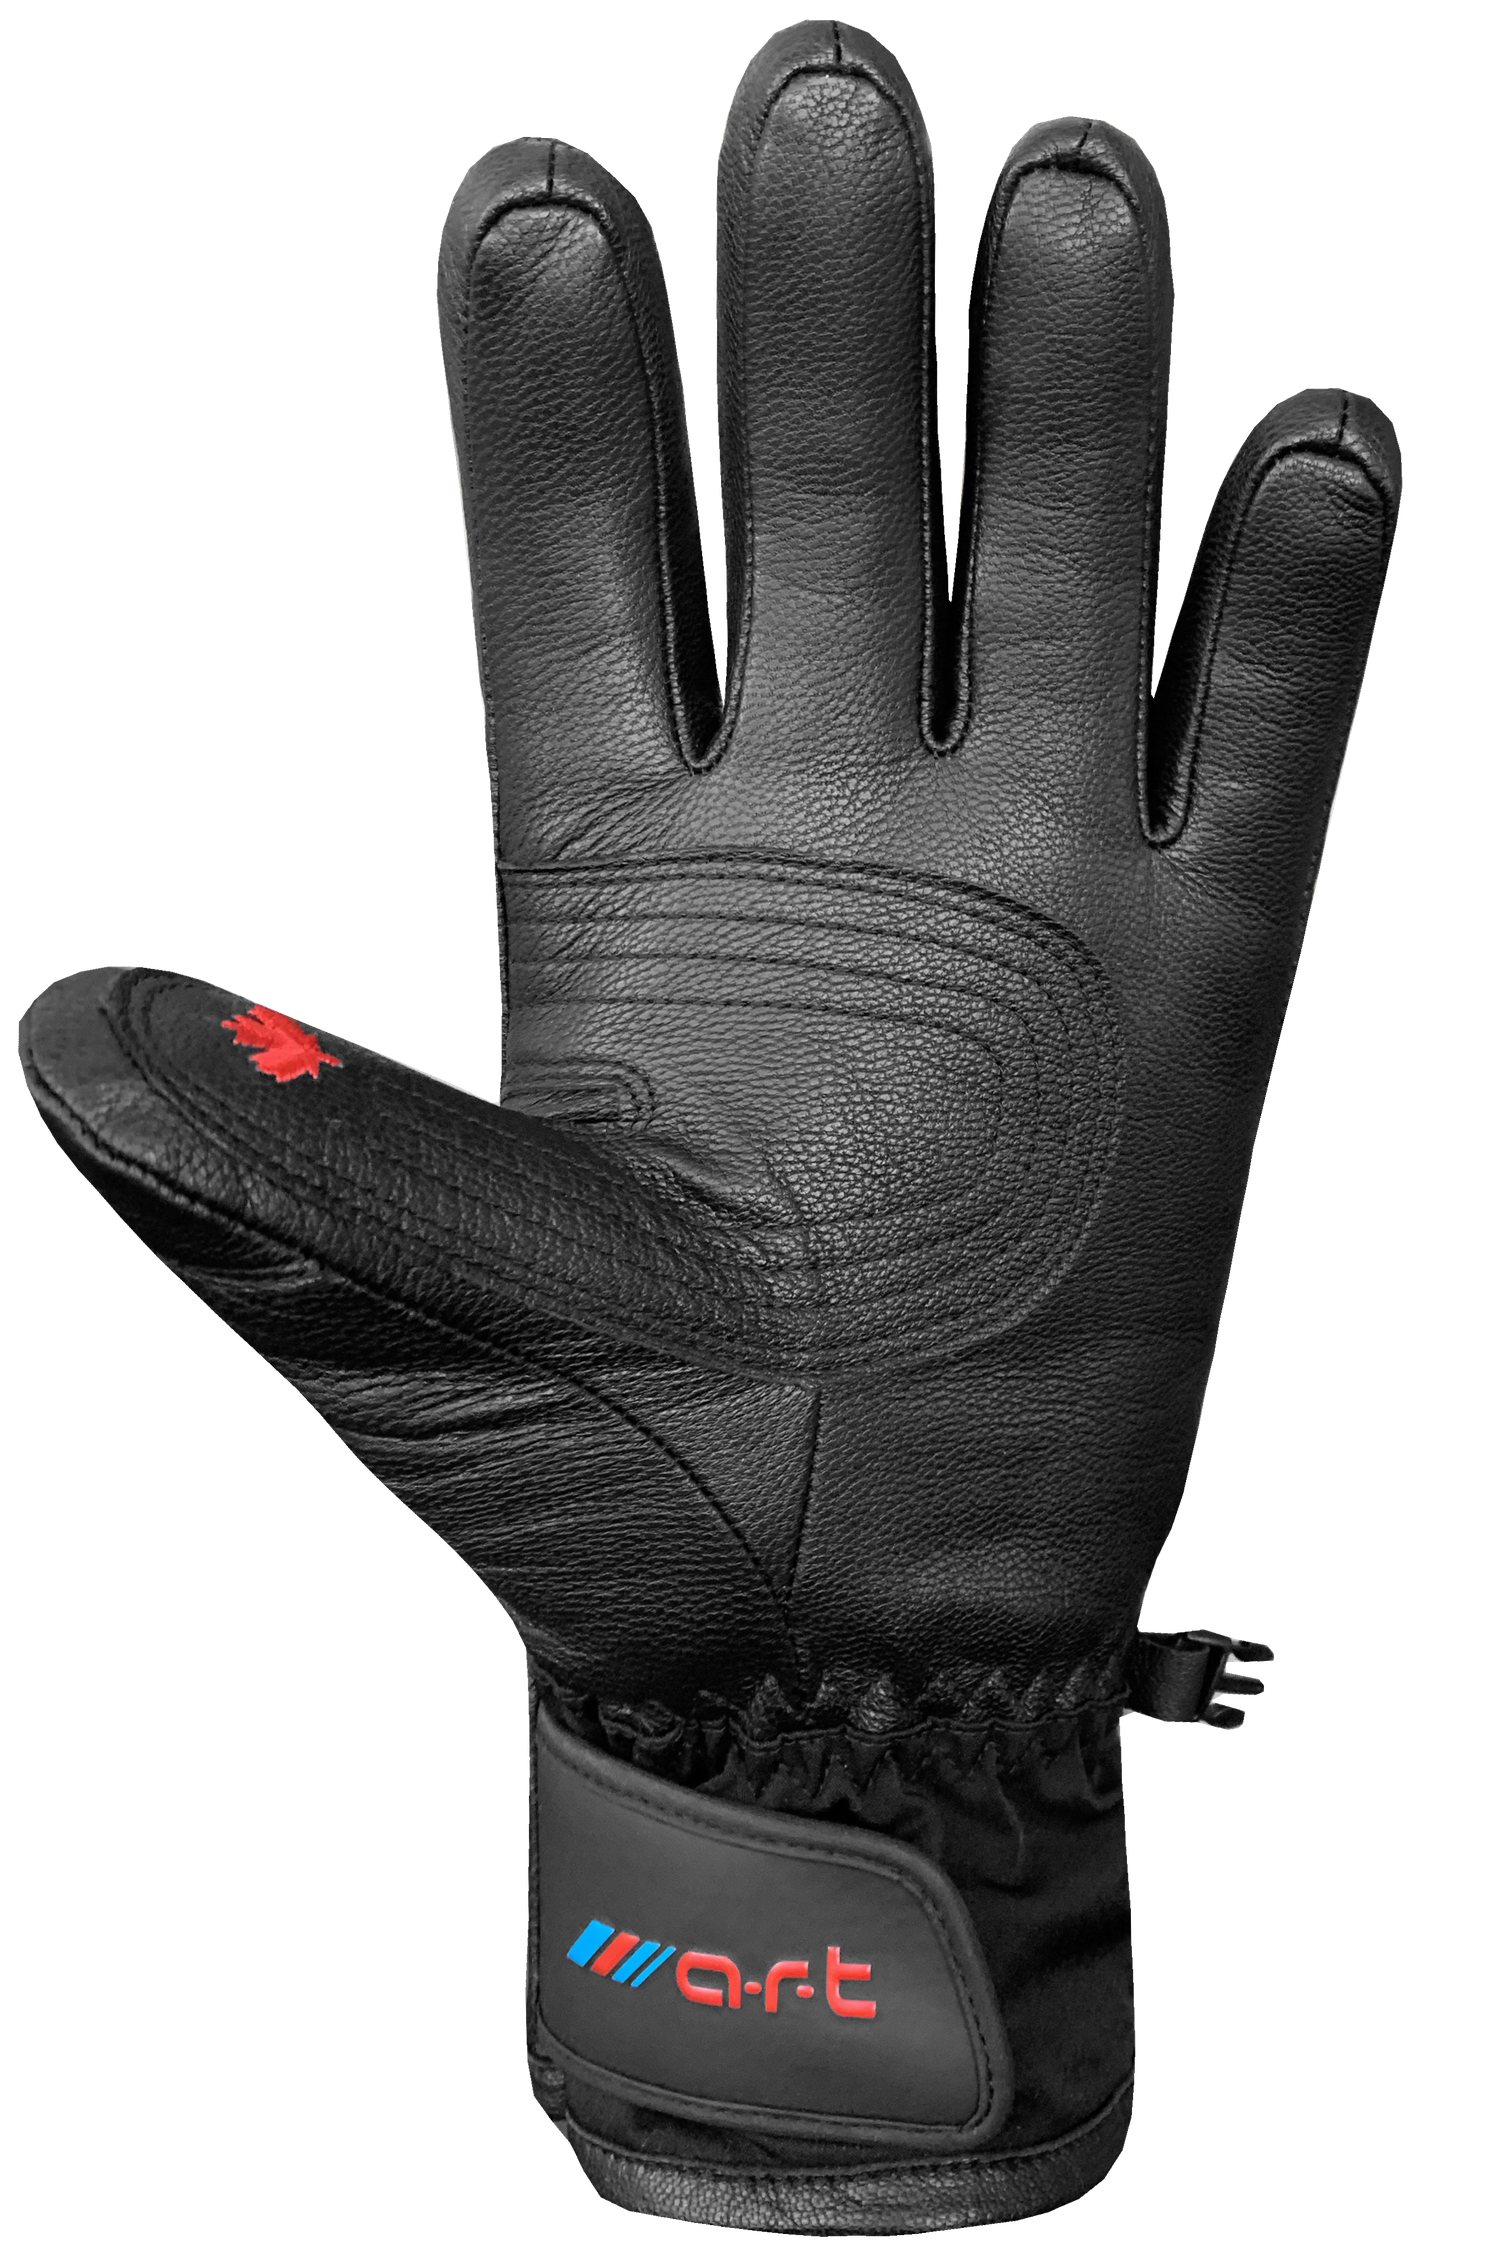 Son of T 4 Gloves - Adult